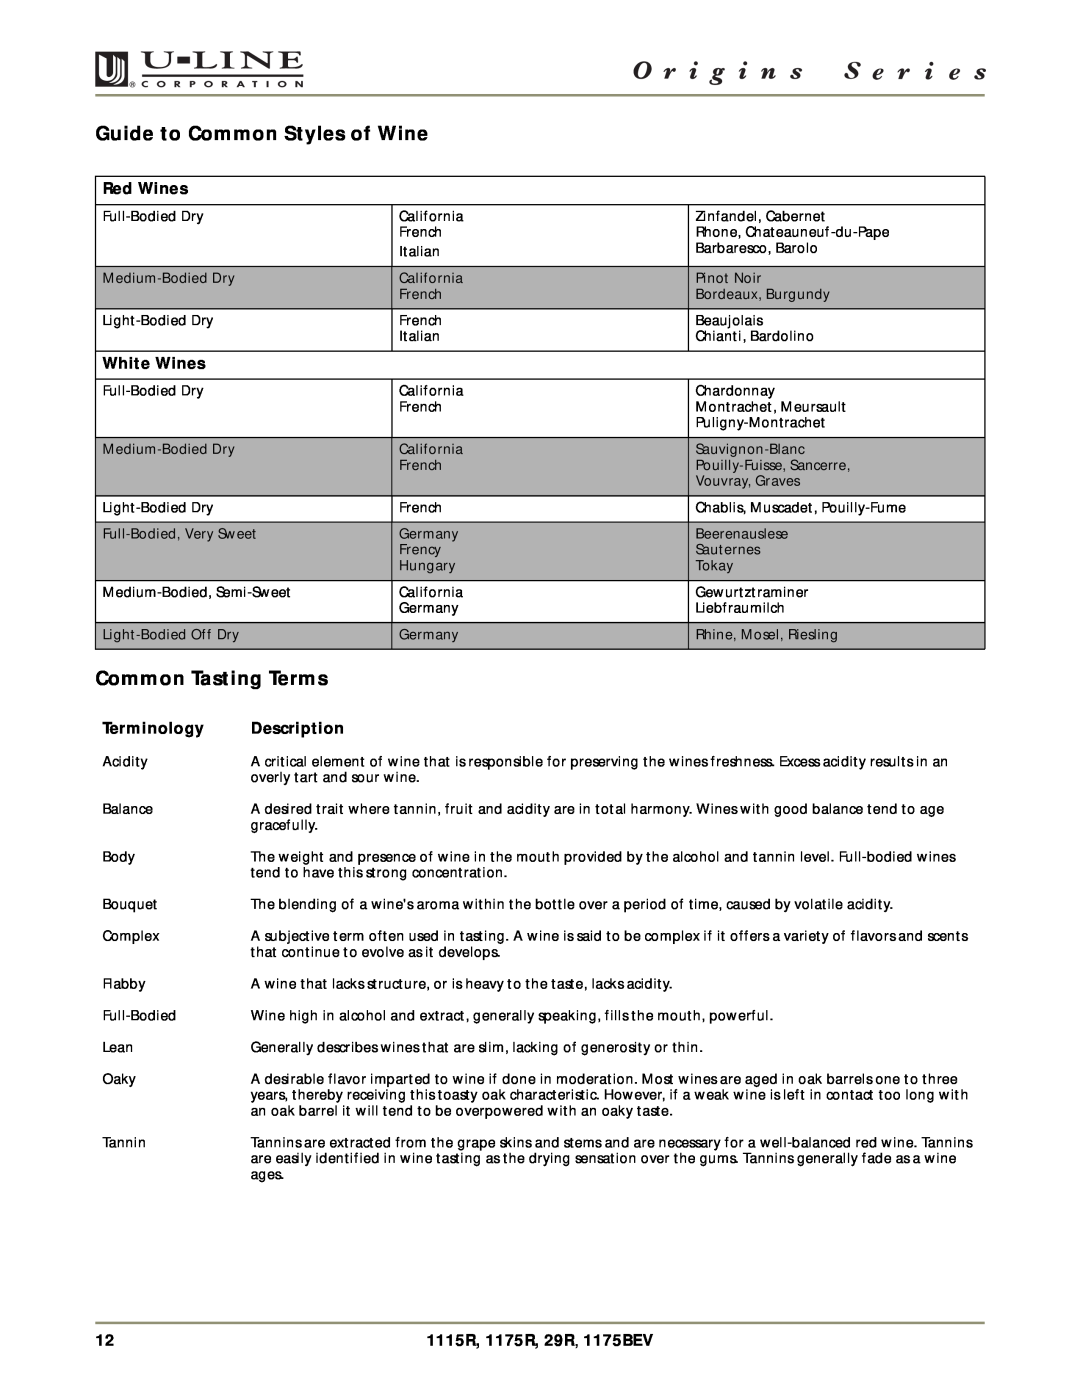 U-Line 29R, 1175BEV Guide to Common Styles of Wine, Common Tasting Terms, Red Wines, White Wines, Terminology, Description 